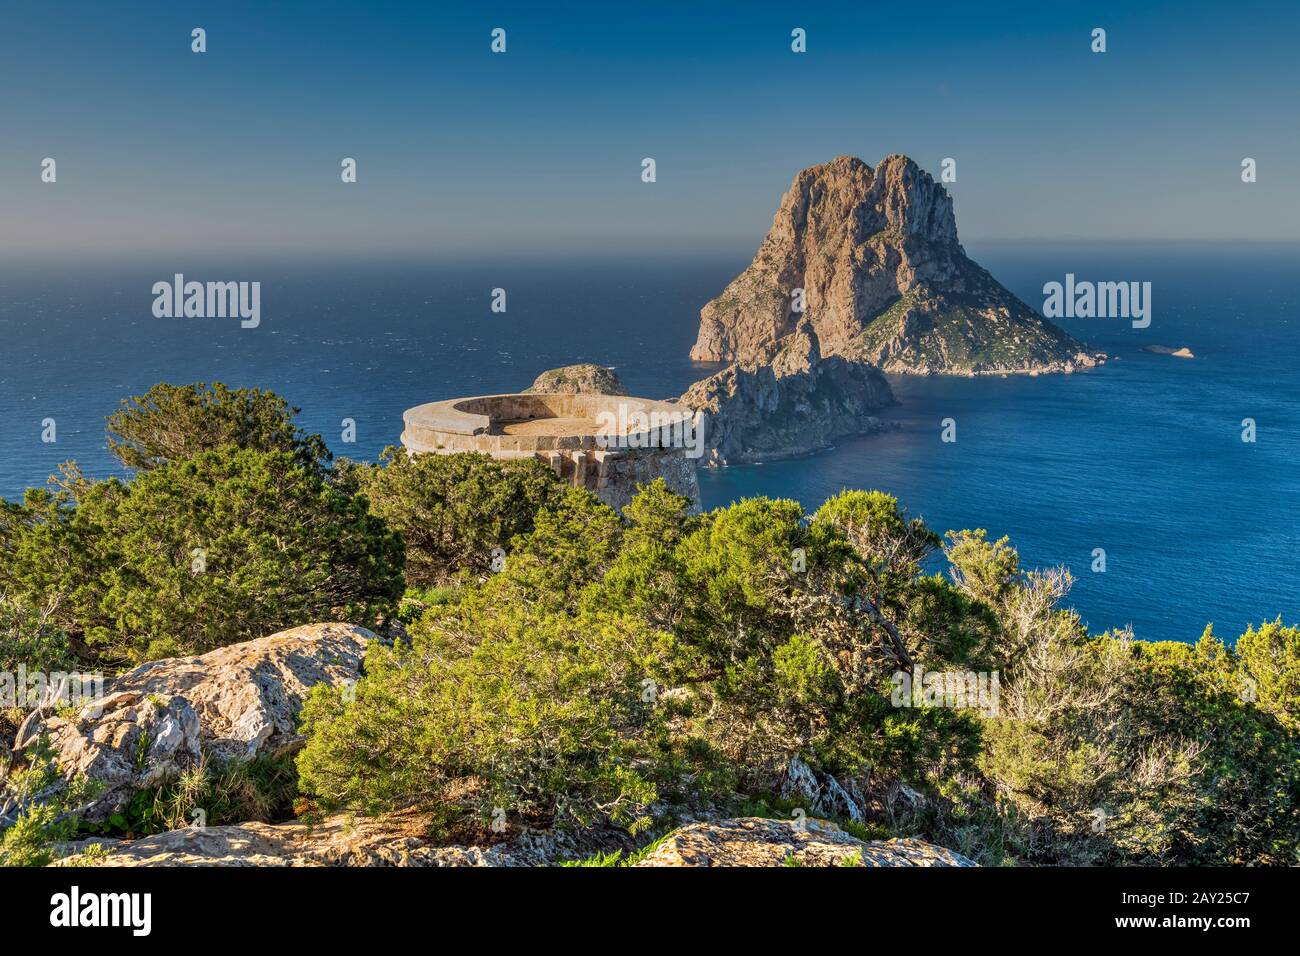 Torre des Savinar defence tower with Es Vedra island in the background, Ibiza, Balearic Islands, Spain Stock Photo